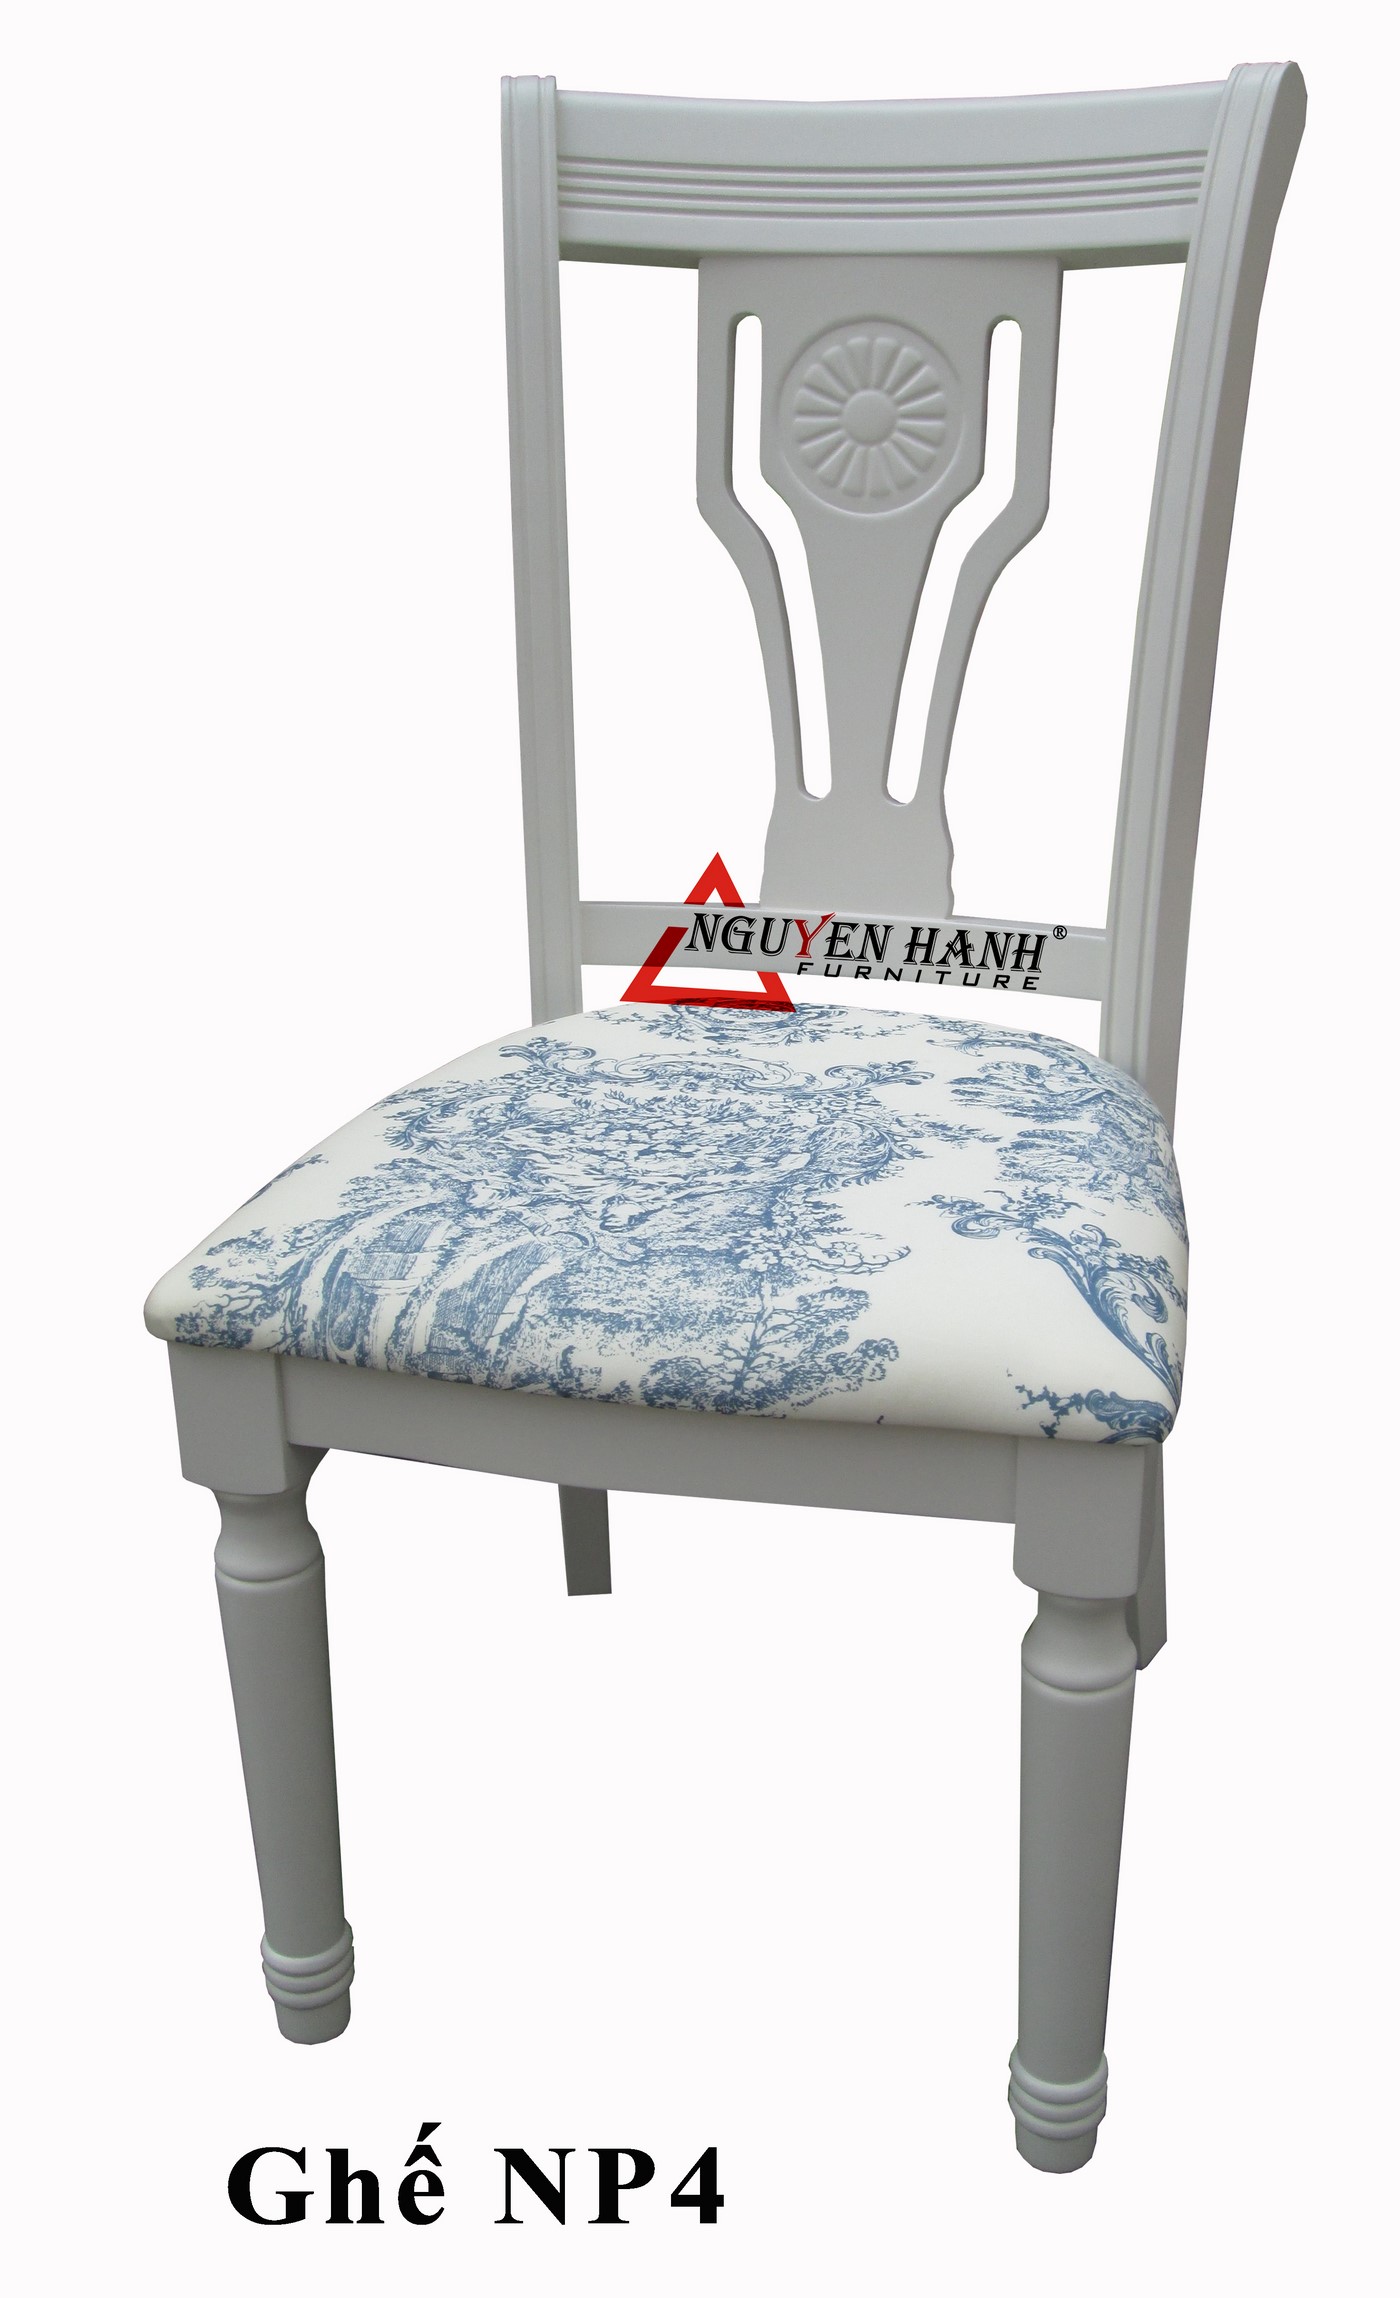 Name product: NP4 chair (White) - Dimensions: - Description: Wood natural rubber